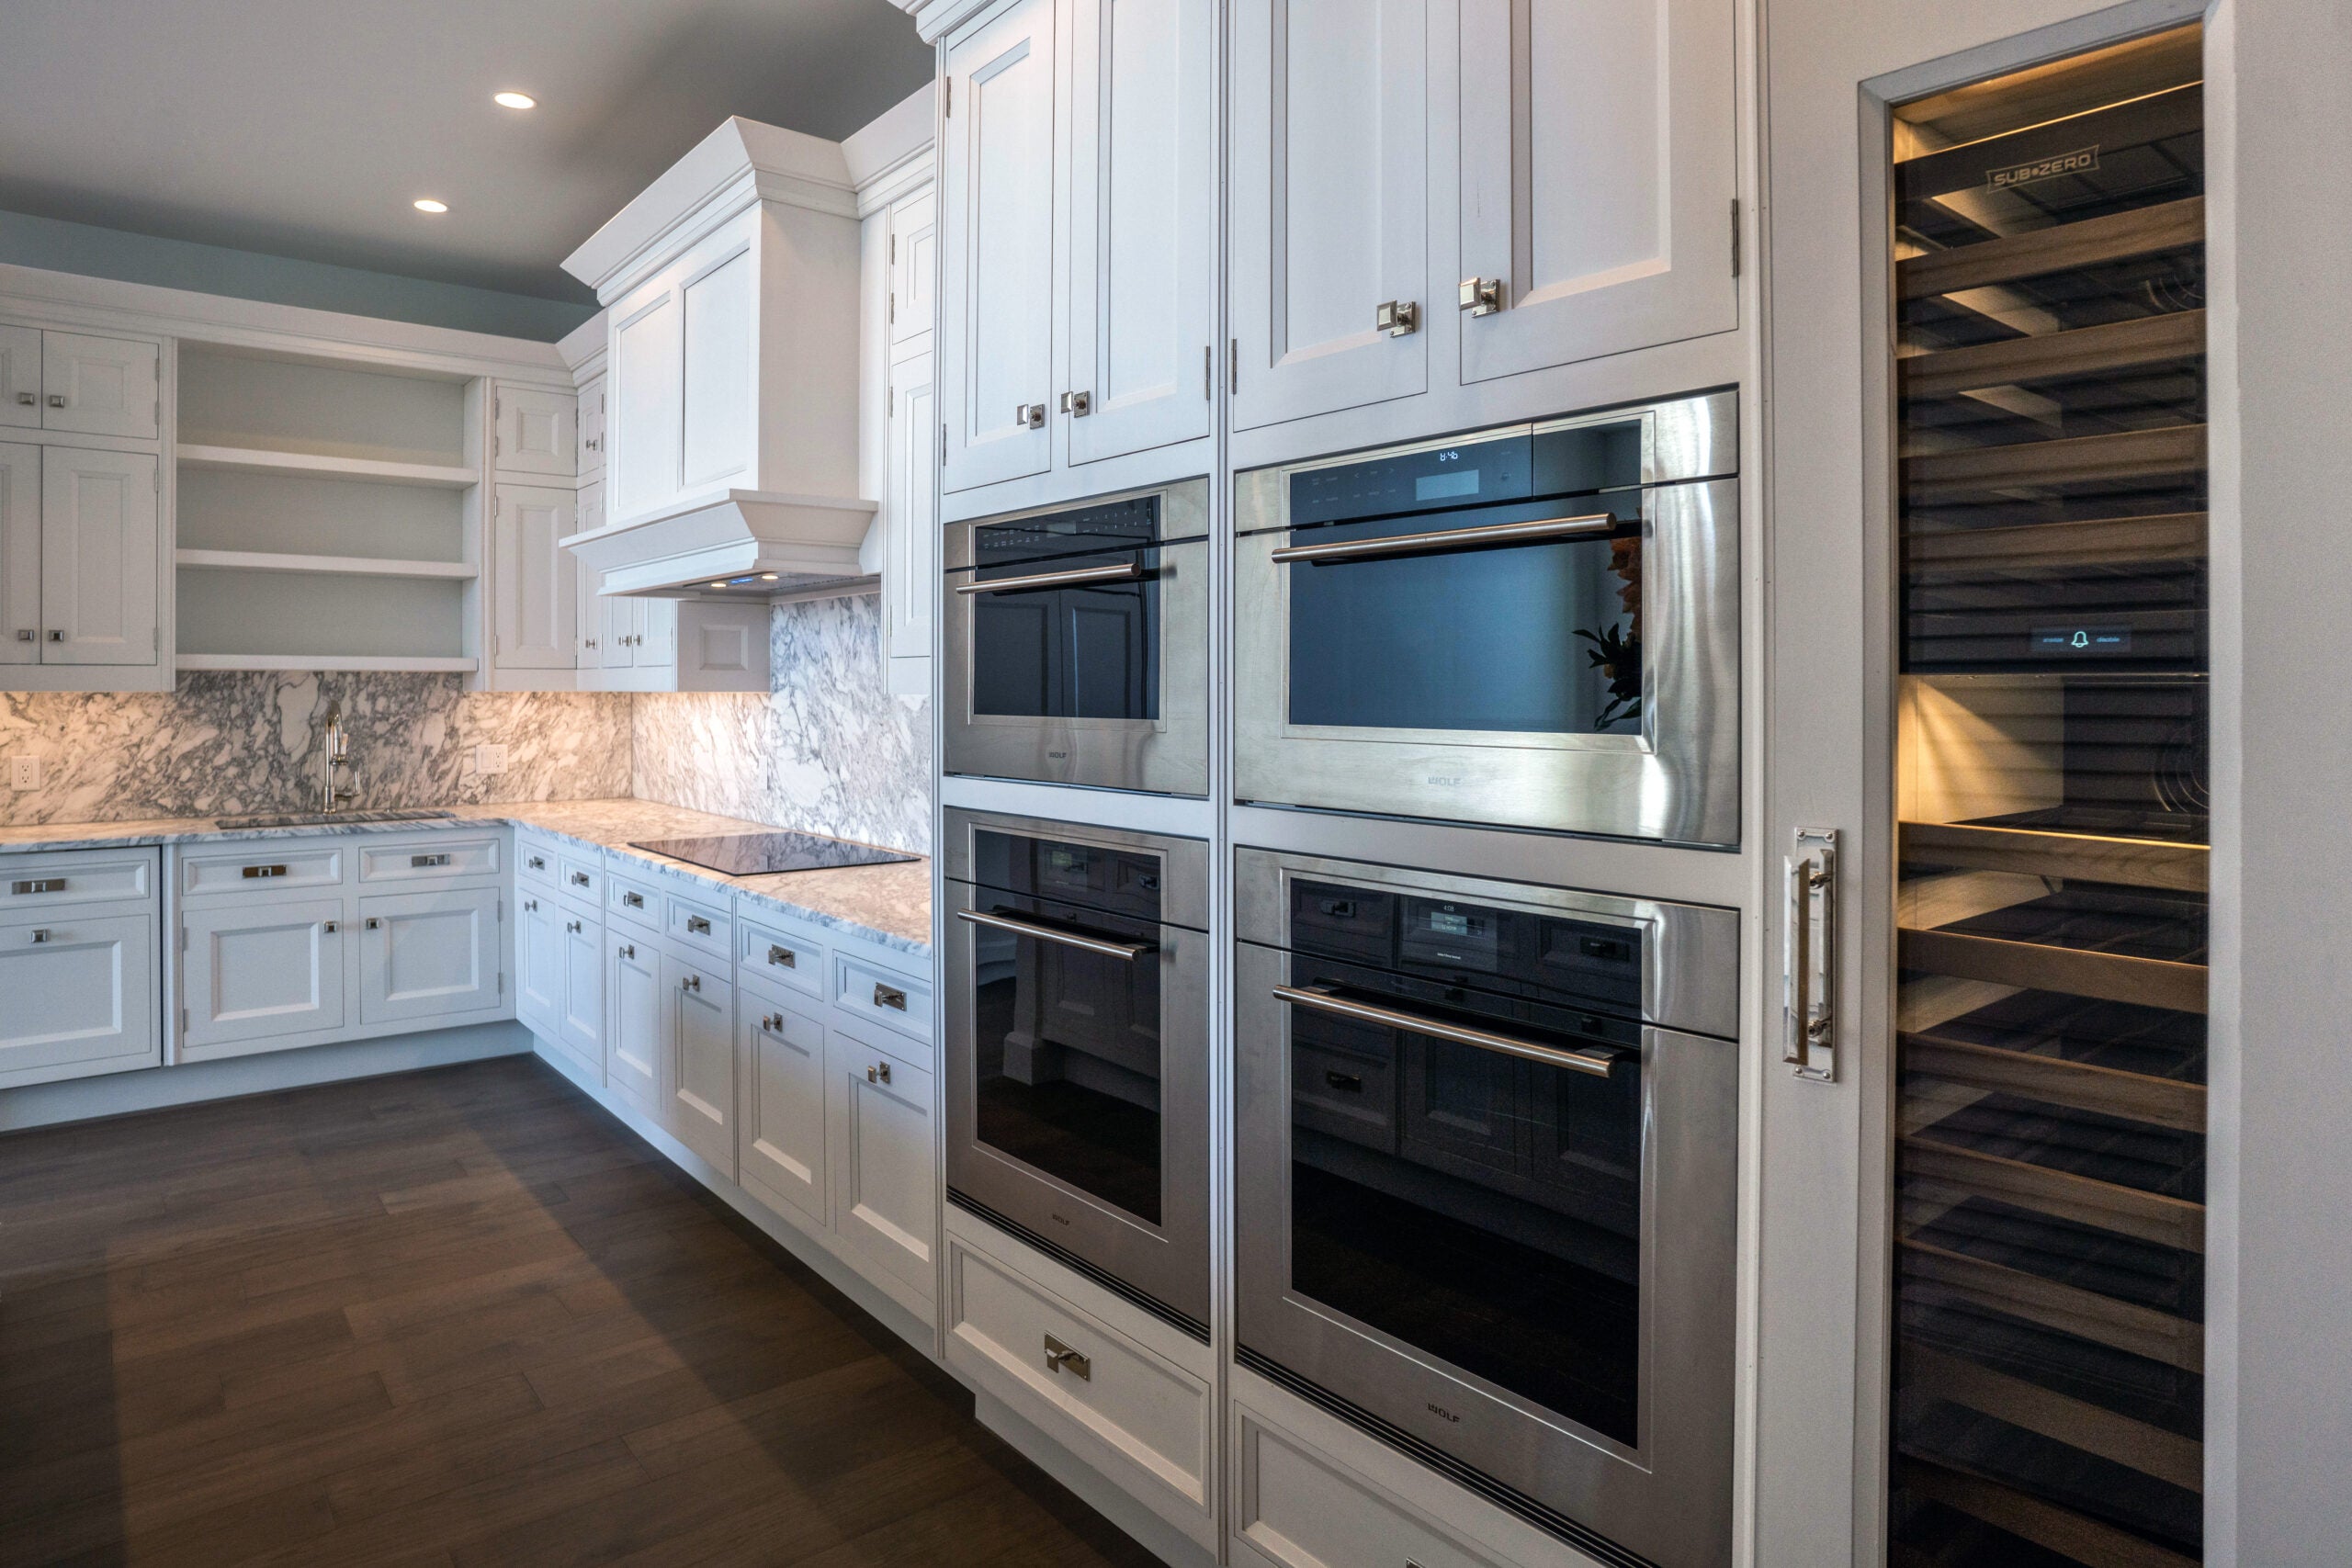 A close-up of stainless steel appliances set among white kitchen cabinets.